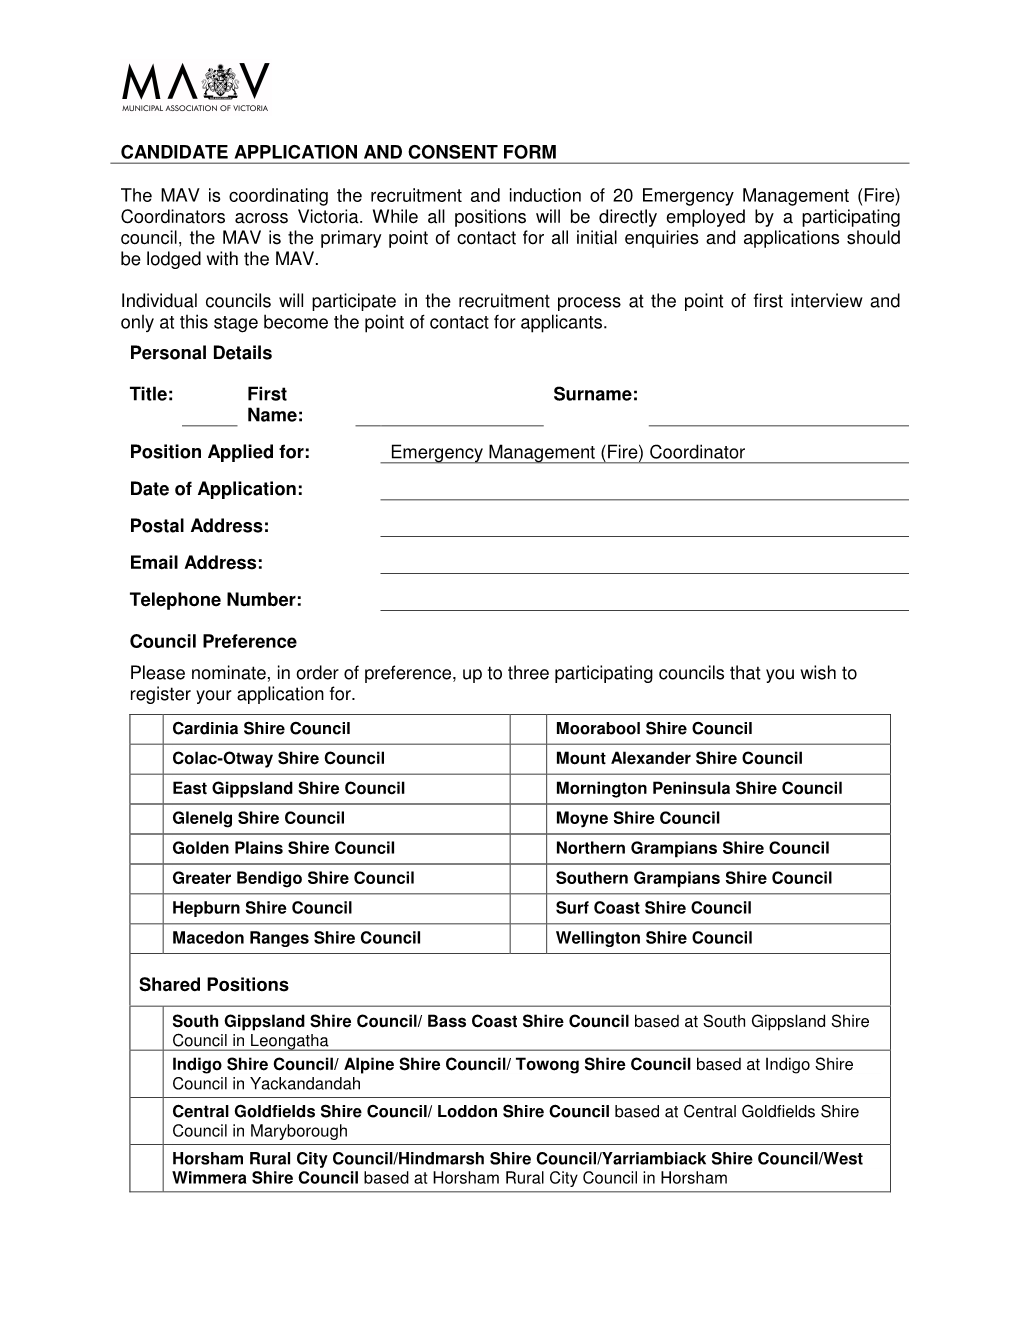 Candidate Application and Consent Form